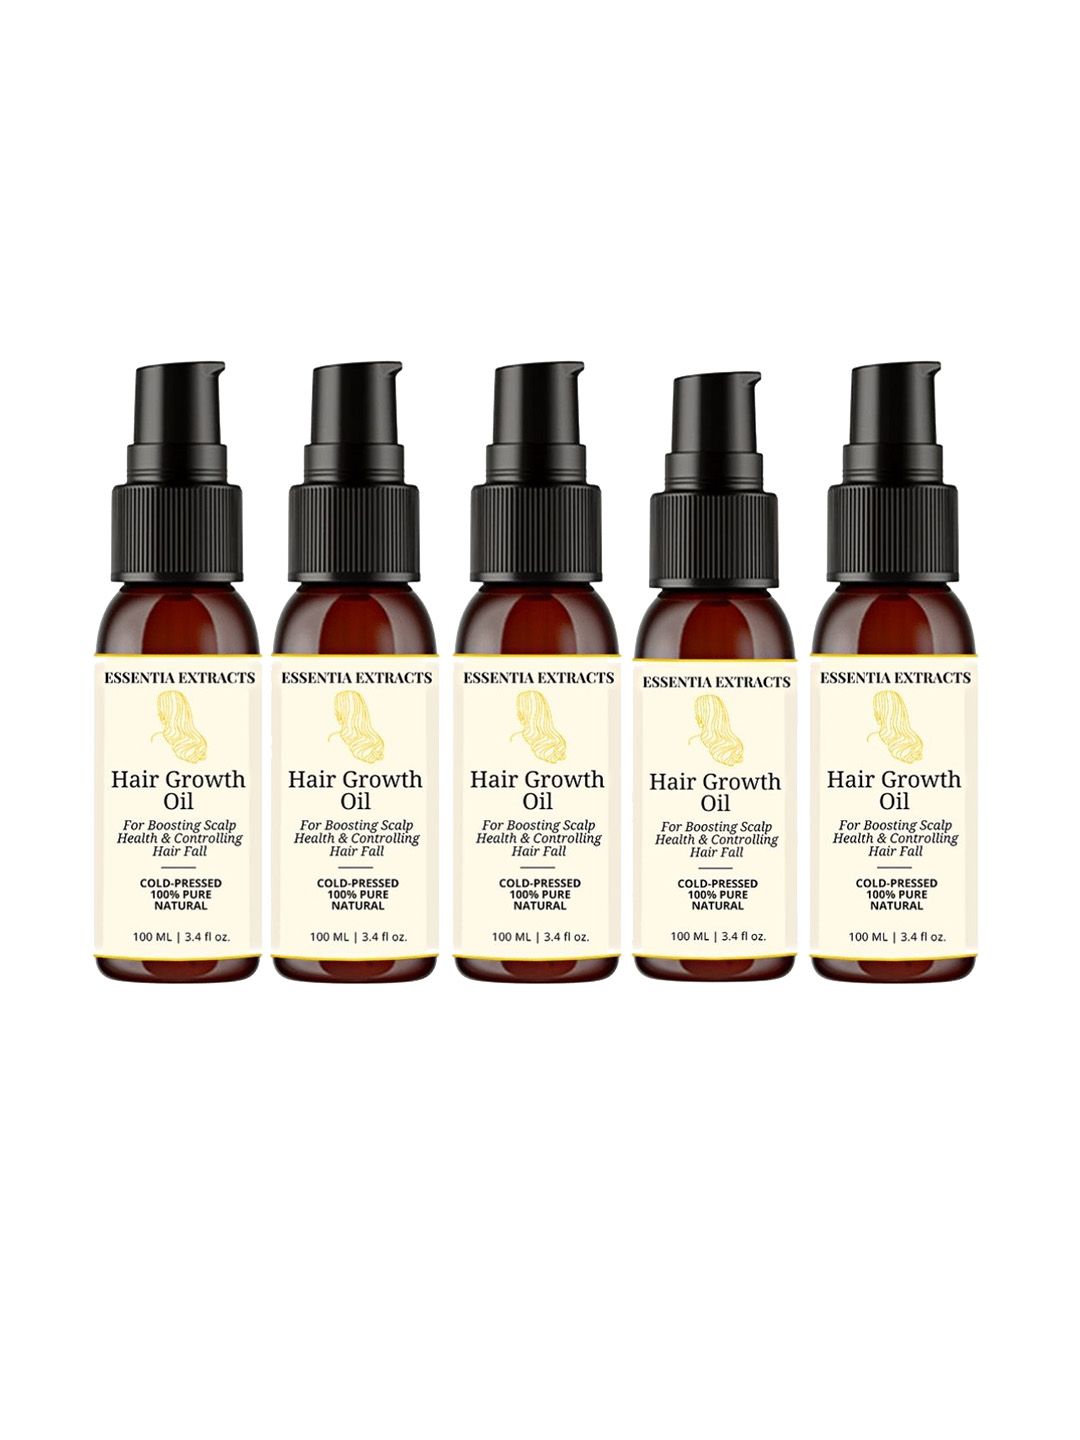 ESSENTIA EXTRACTS Yellow Pack of 5 Hair Growth Oil, 500 ml Each Price in India